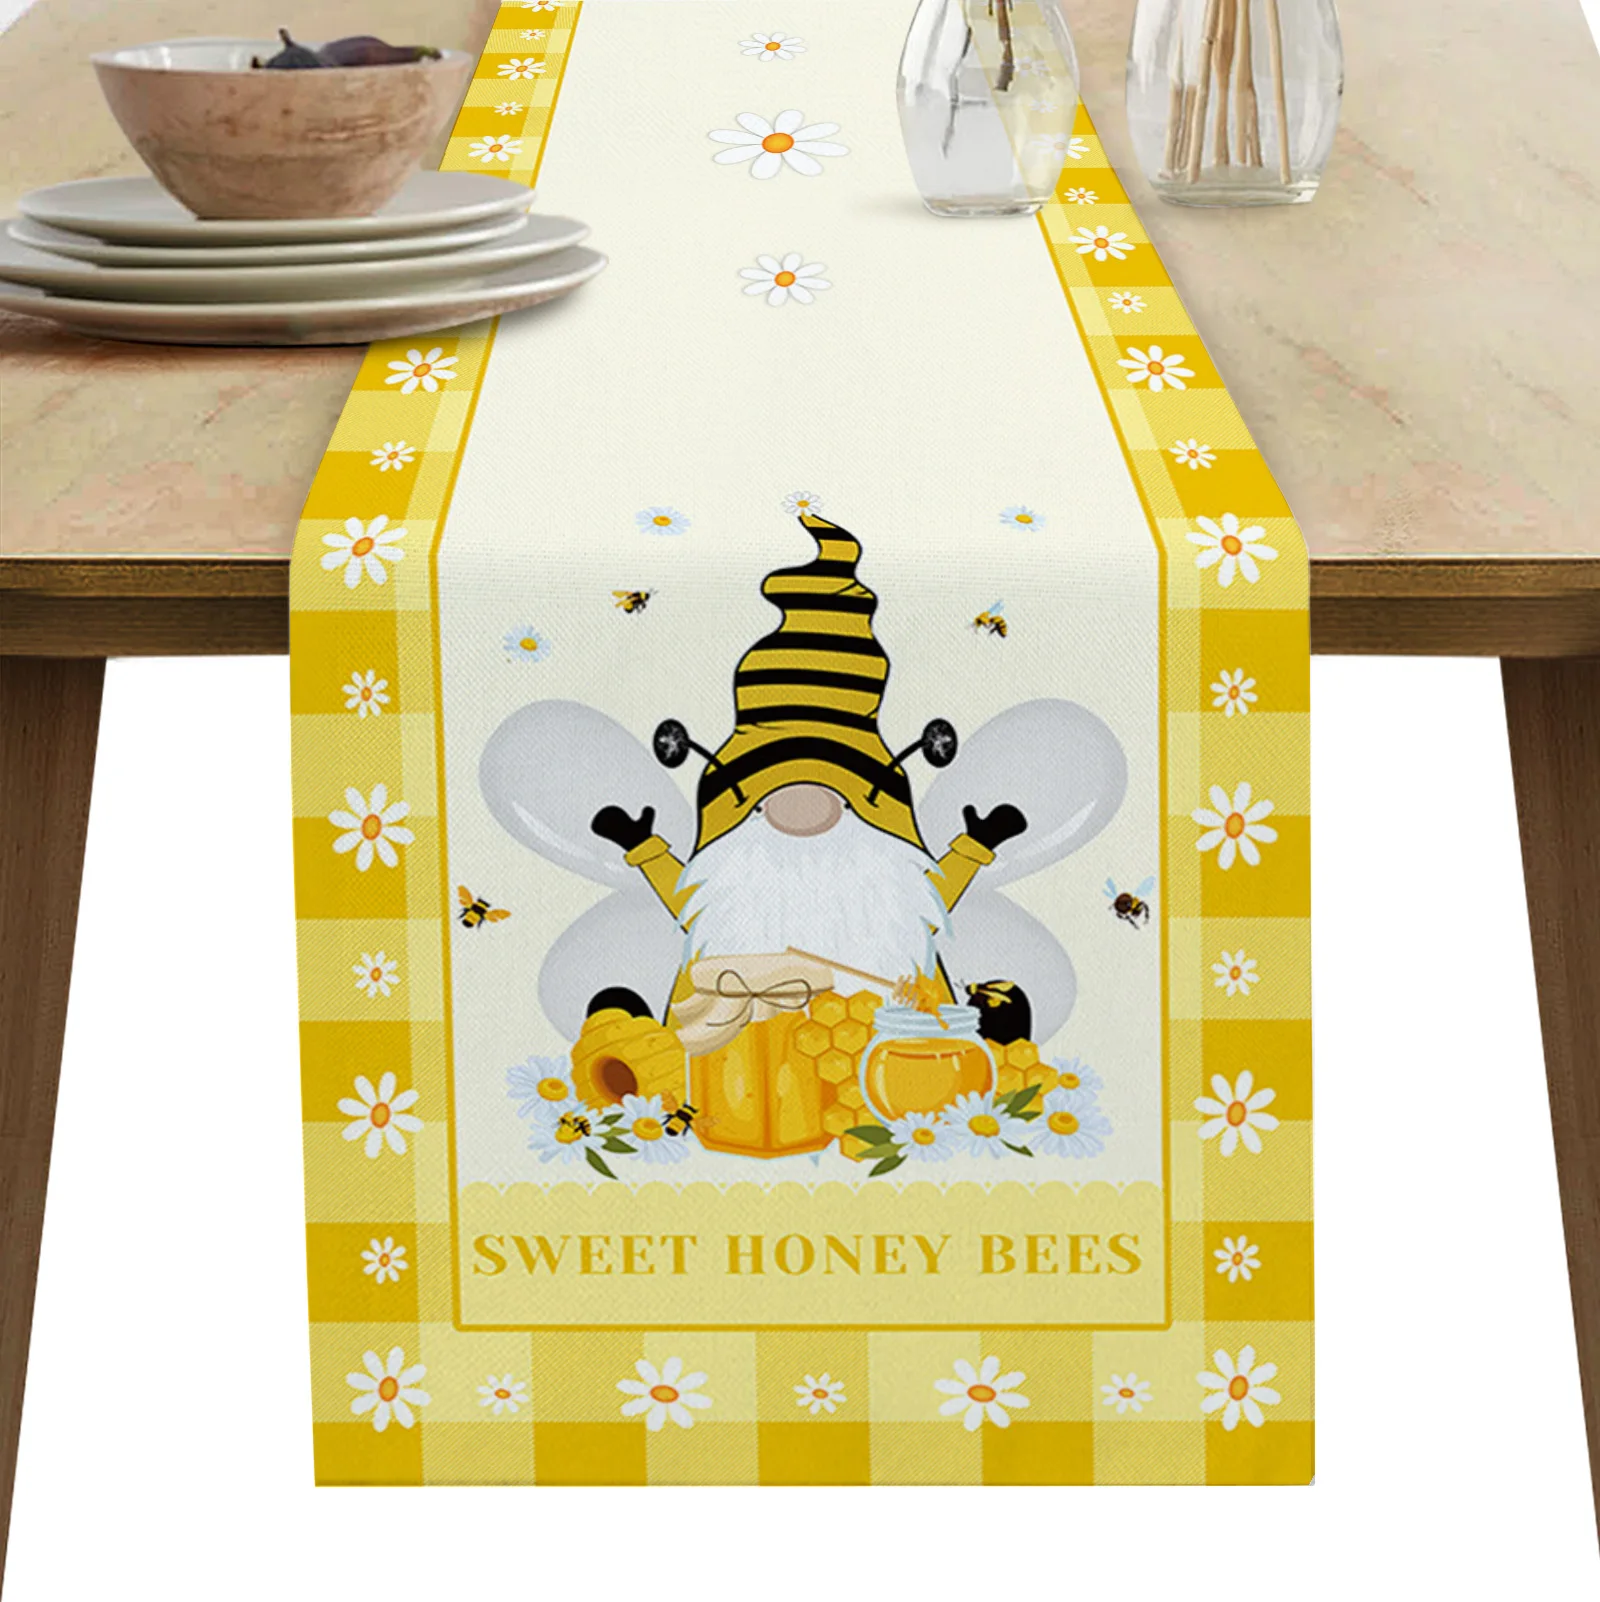 

Bee Dwarf Daisy Honey Lattice Table Runner Modern Party Dining Table Runner Wedding Table Decor Tablecloth and Placemats